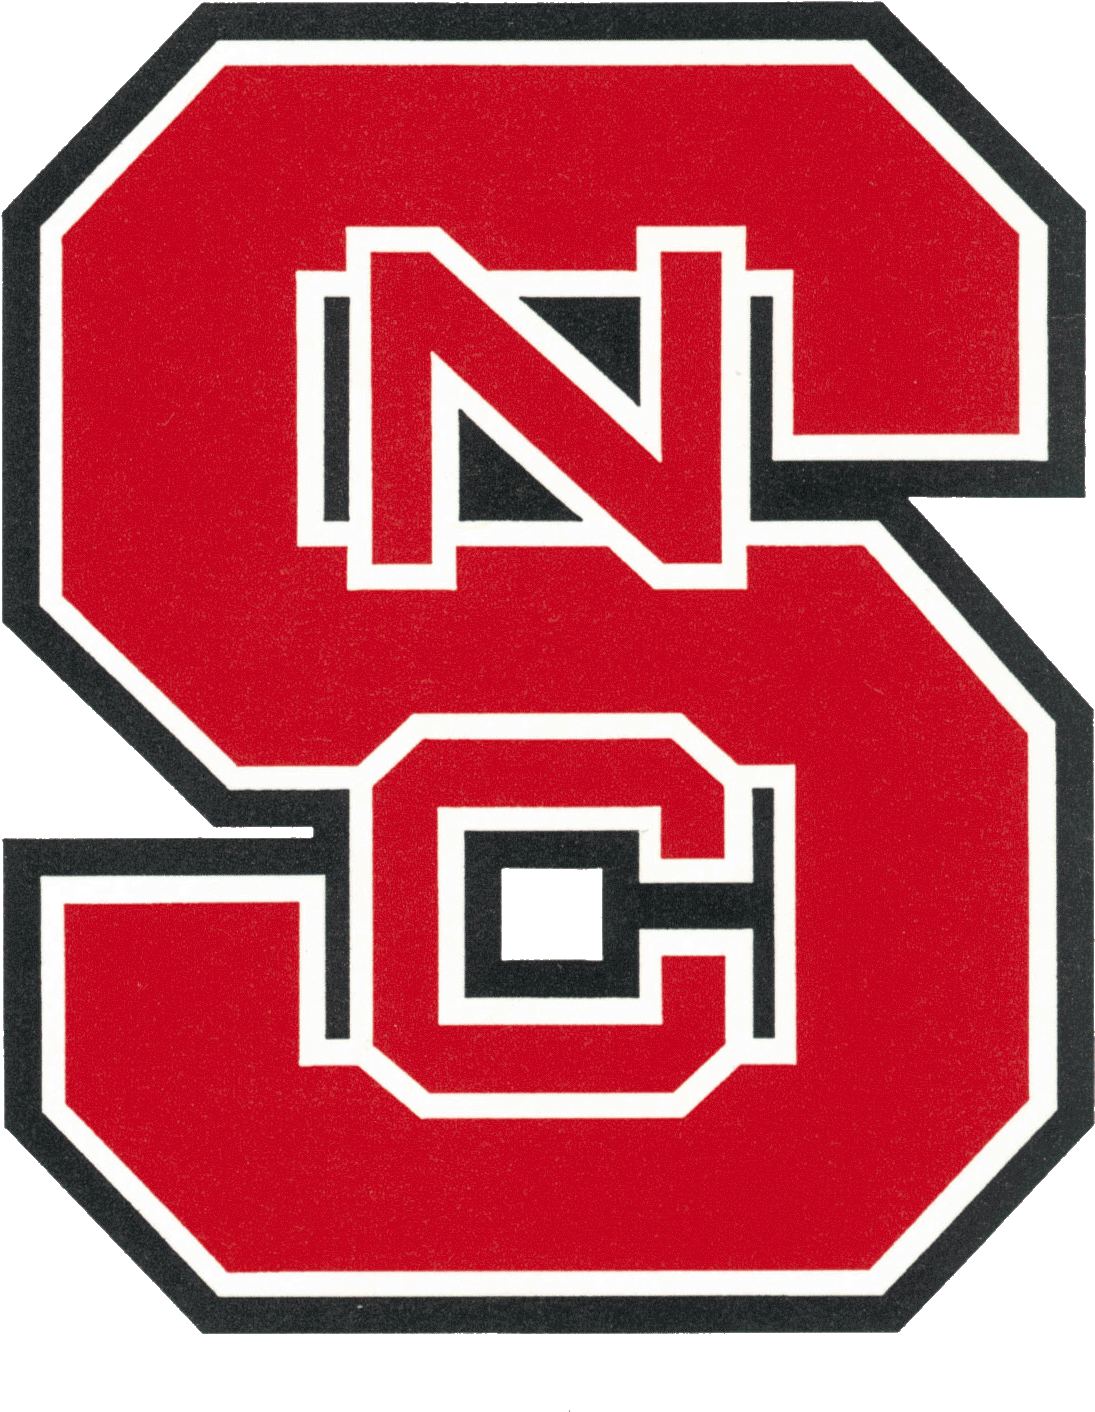 Ncstate.